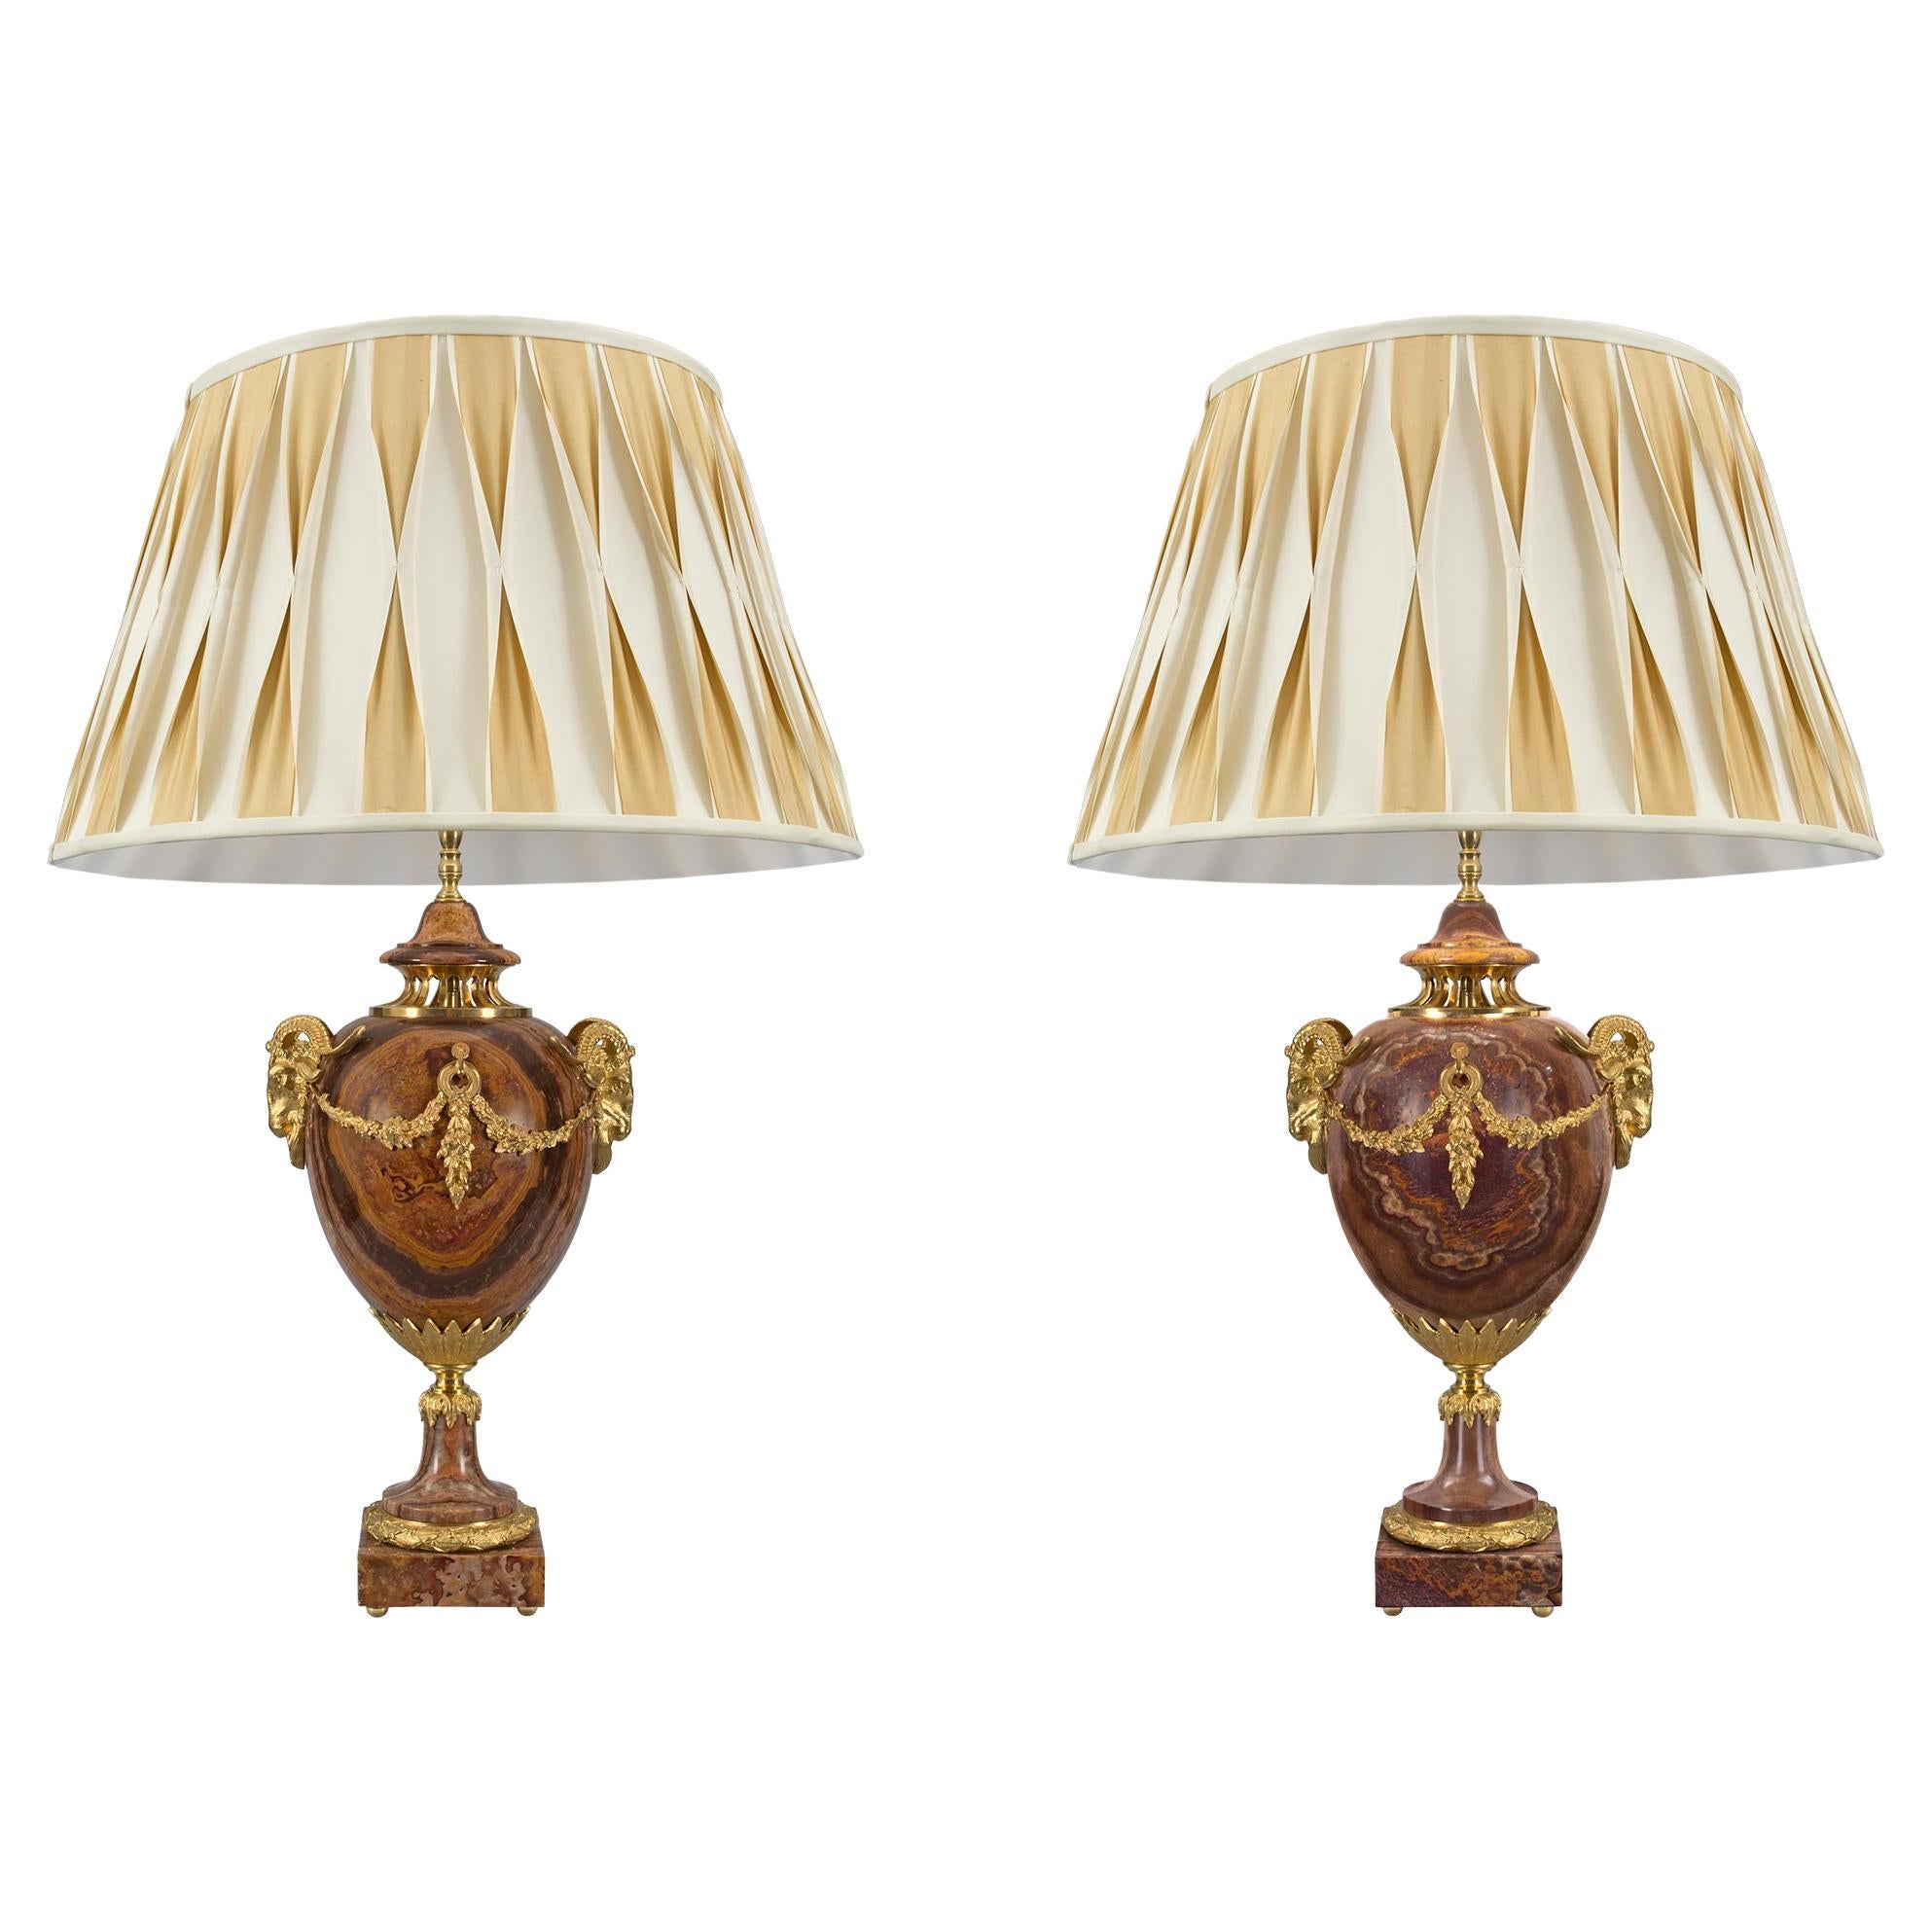 Pair of French Mid-19th Century Louis XVI Style Lamps For Sale